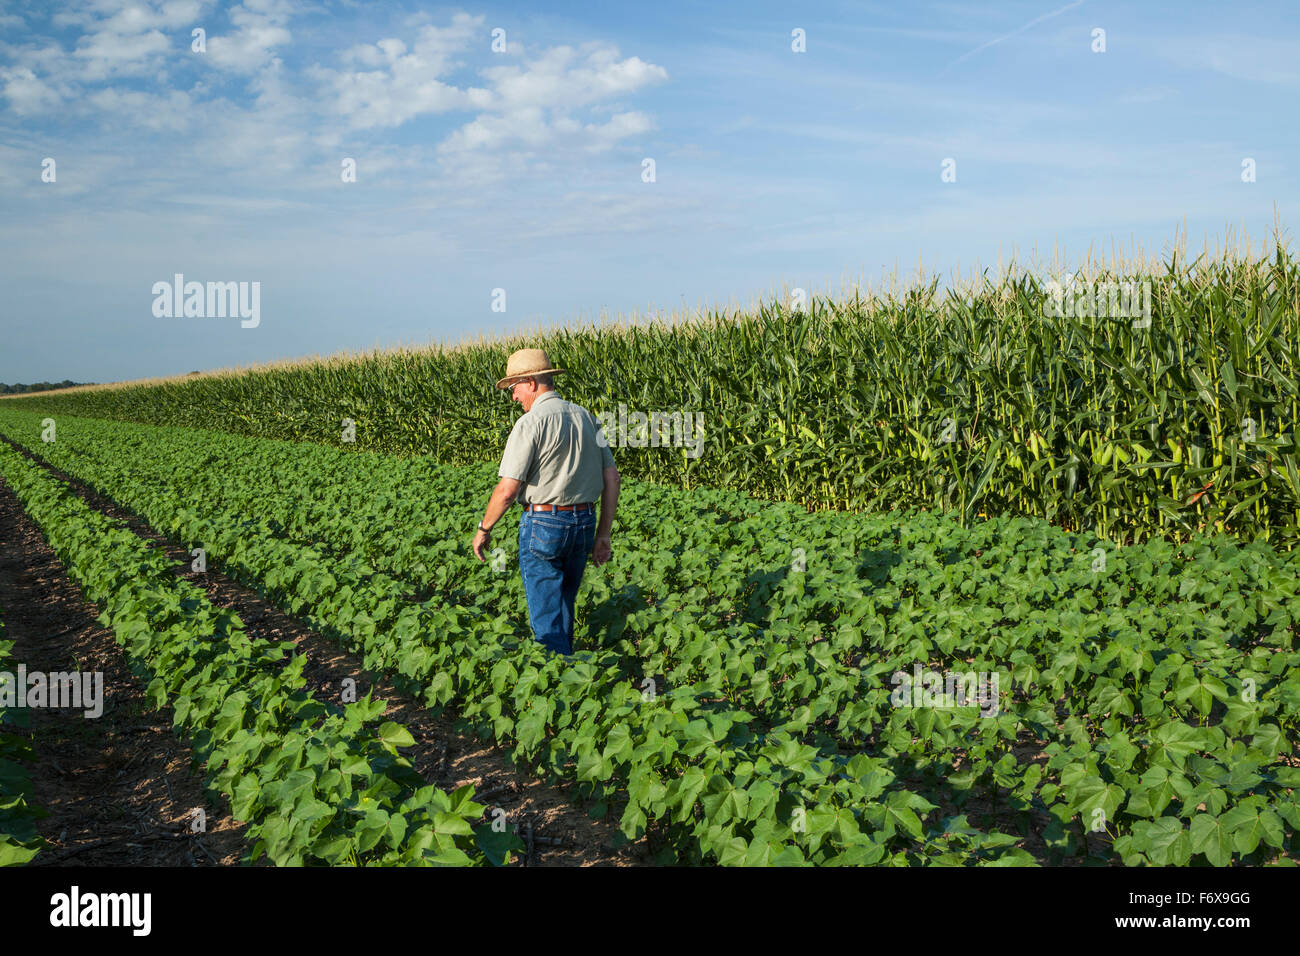 Crop consultant uses tablet to make notes of his observations while checking field of no till cotton in peak fruit development stage Stock Photo